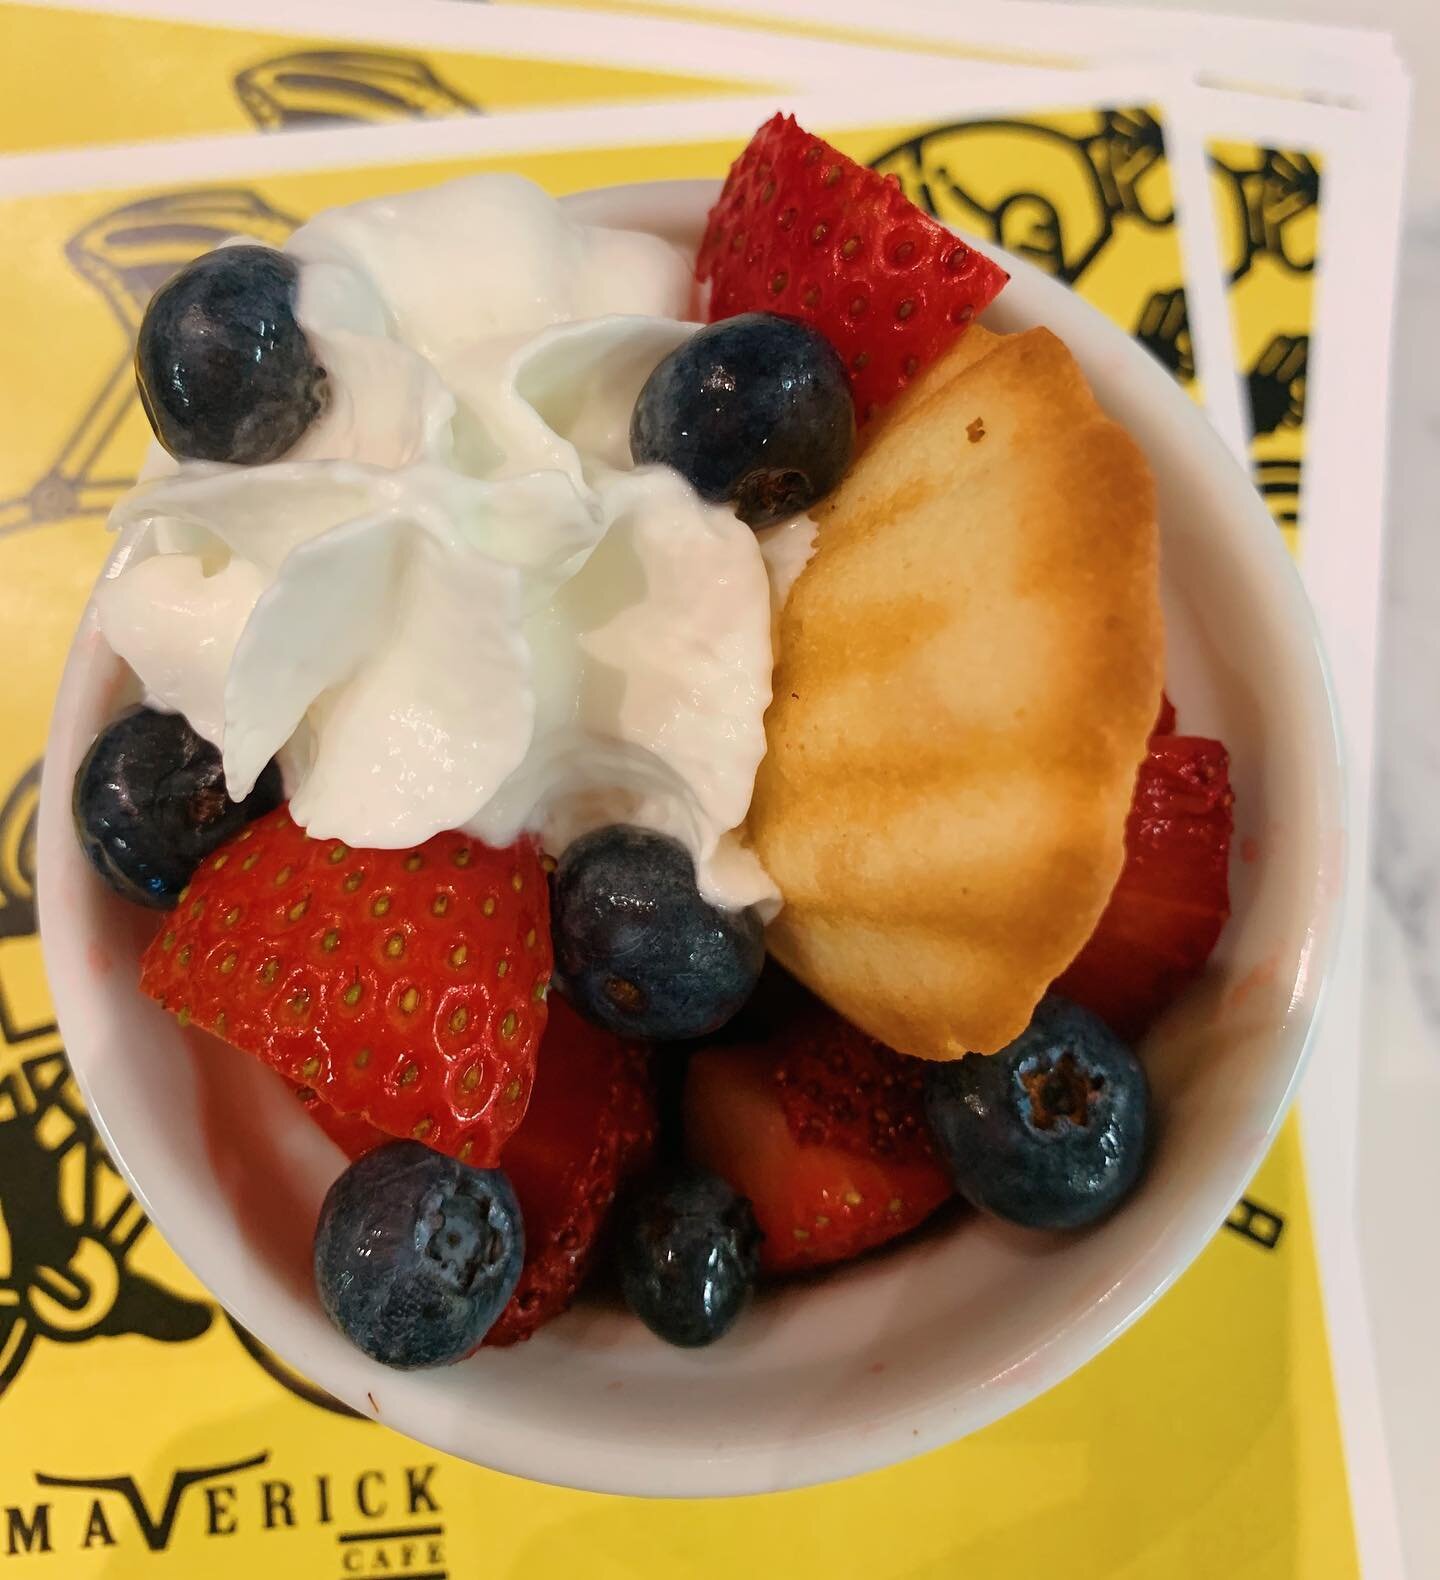 Madeleine &amp; fresh fruit! Topped w/ a dollop of whipped cream, this is a super refreshing treat to snack on while watching the race!